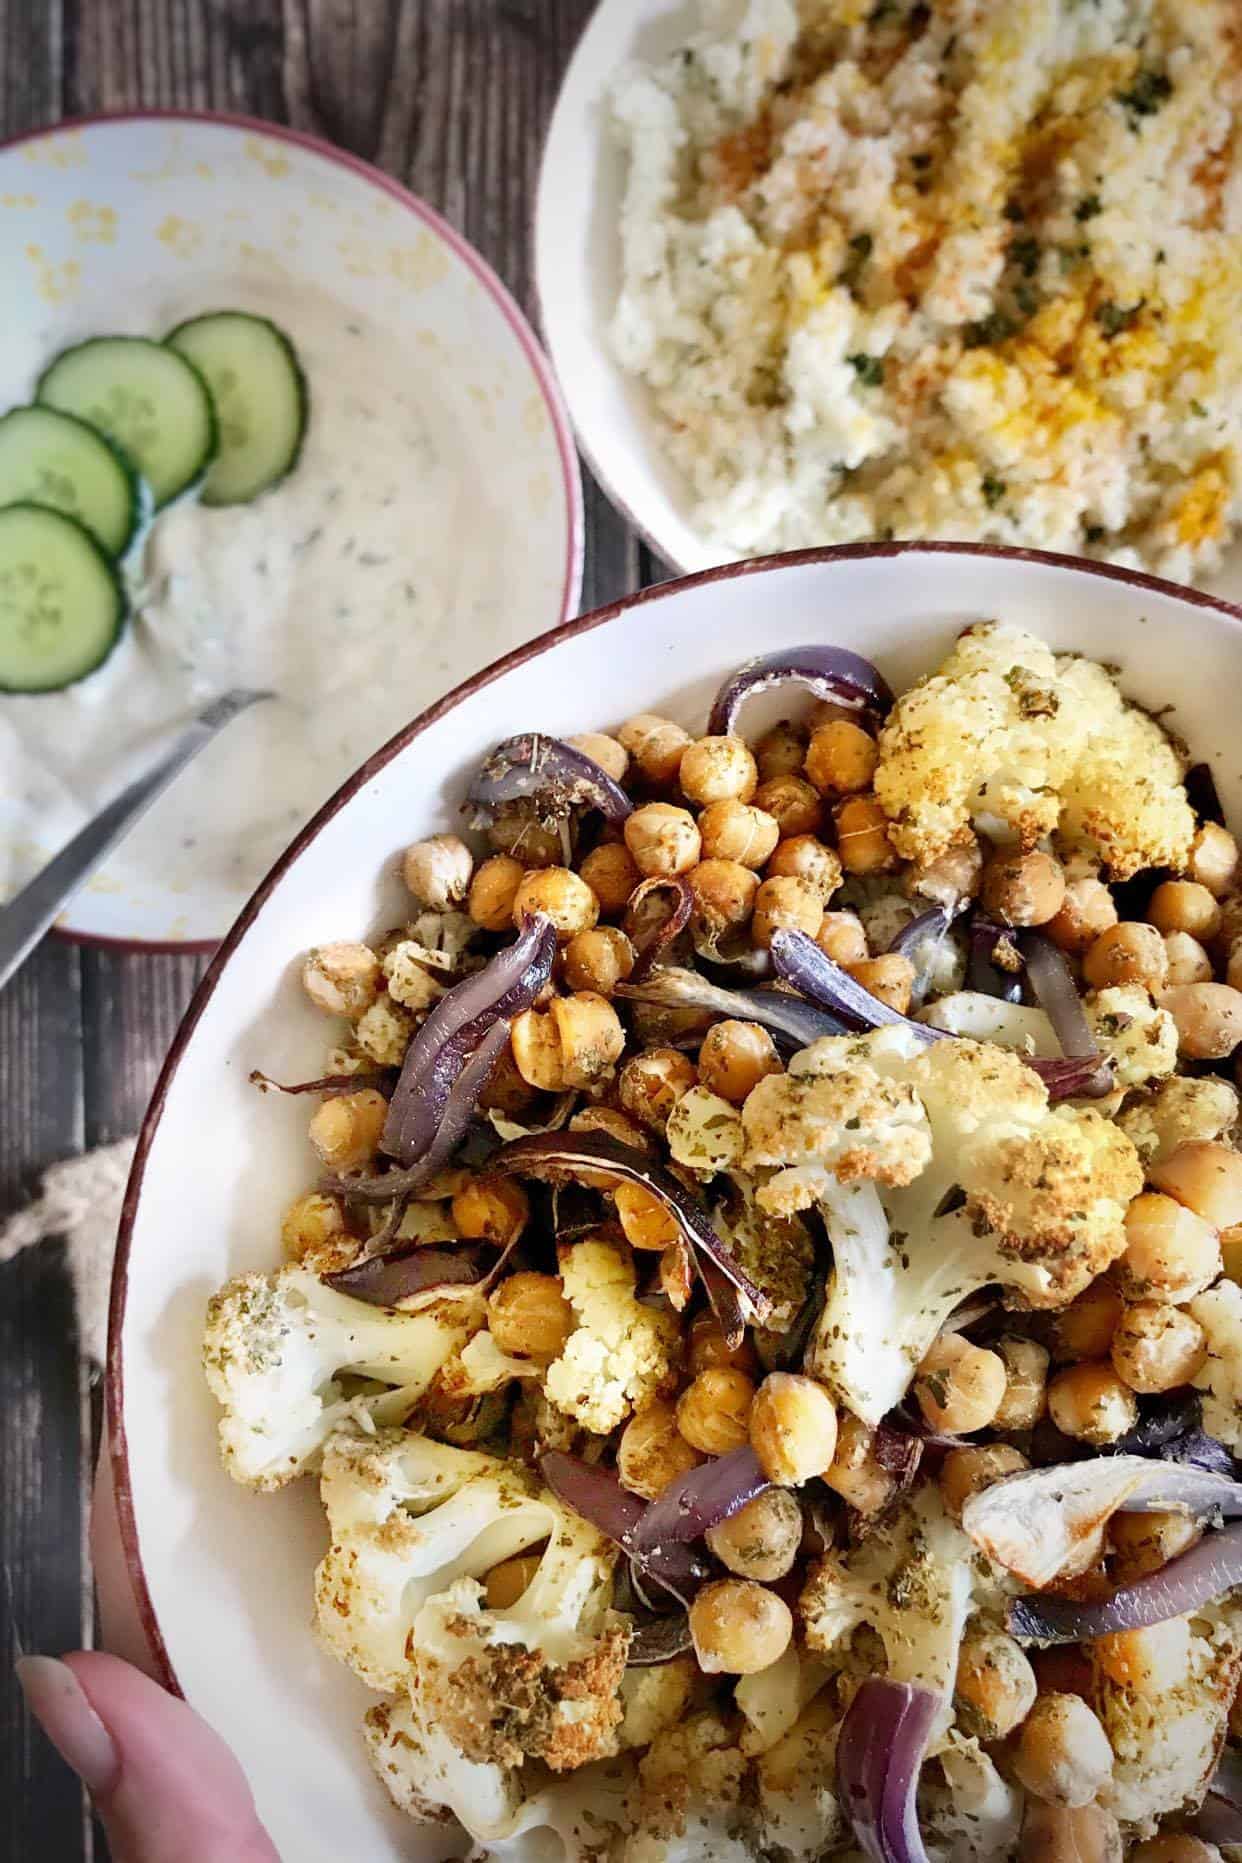 Roasted cauliflower and chickpeas in a bowl.